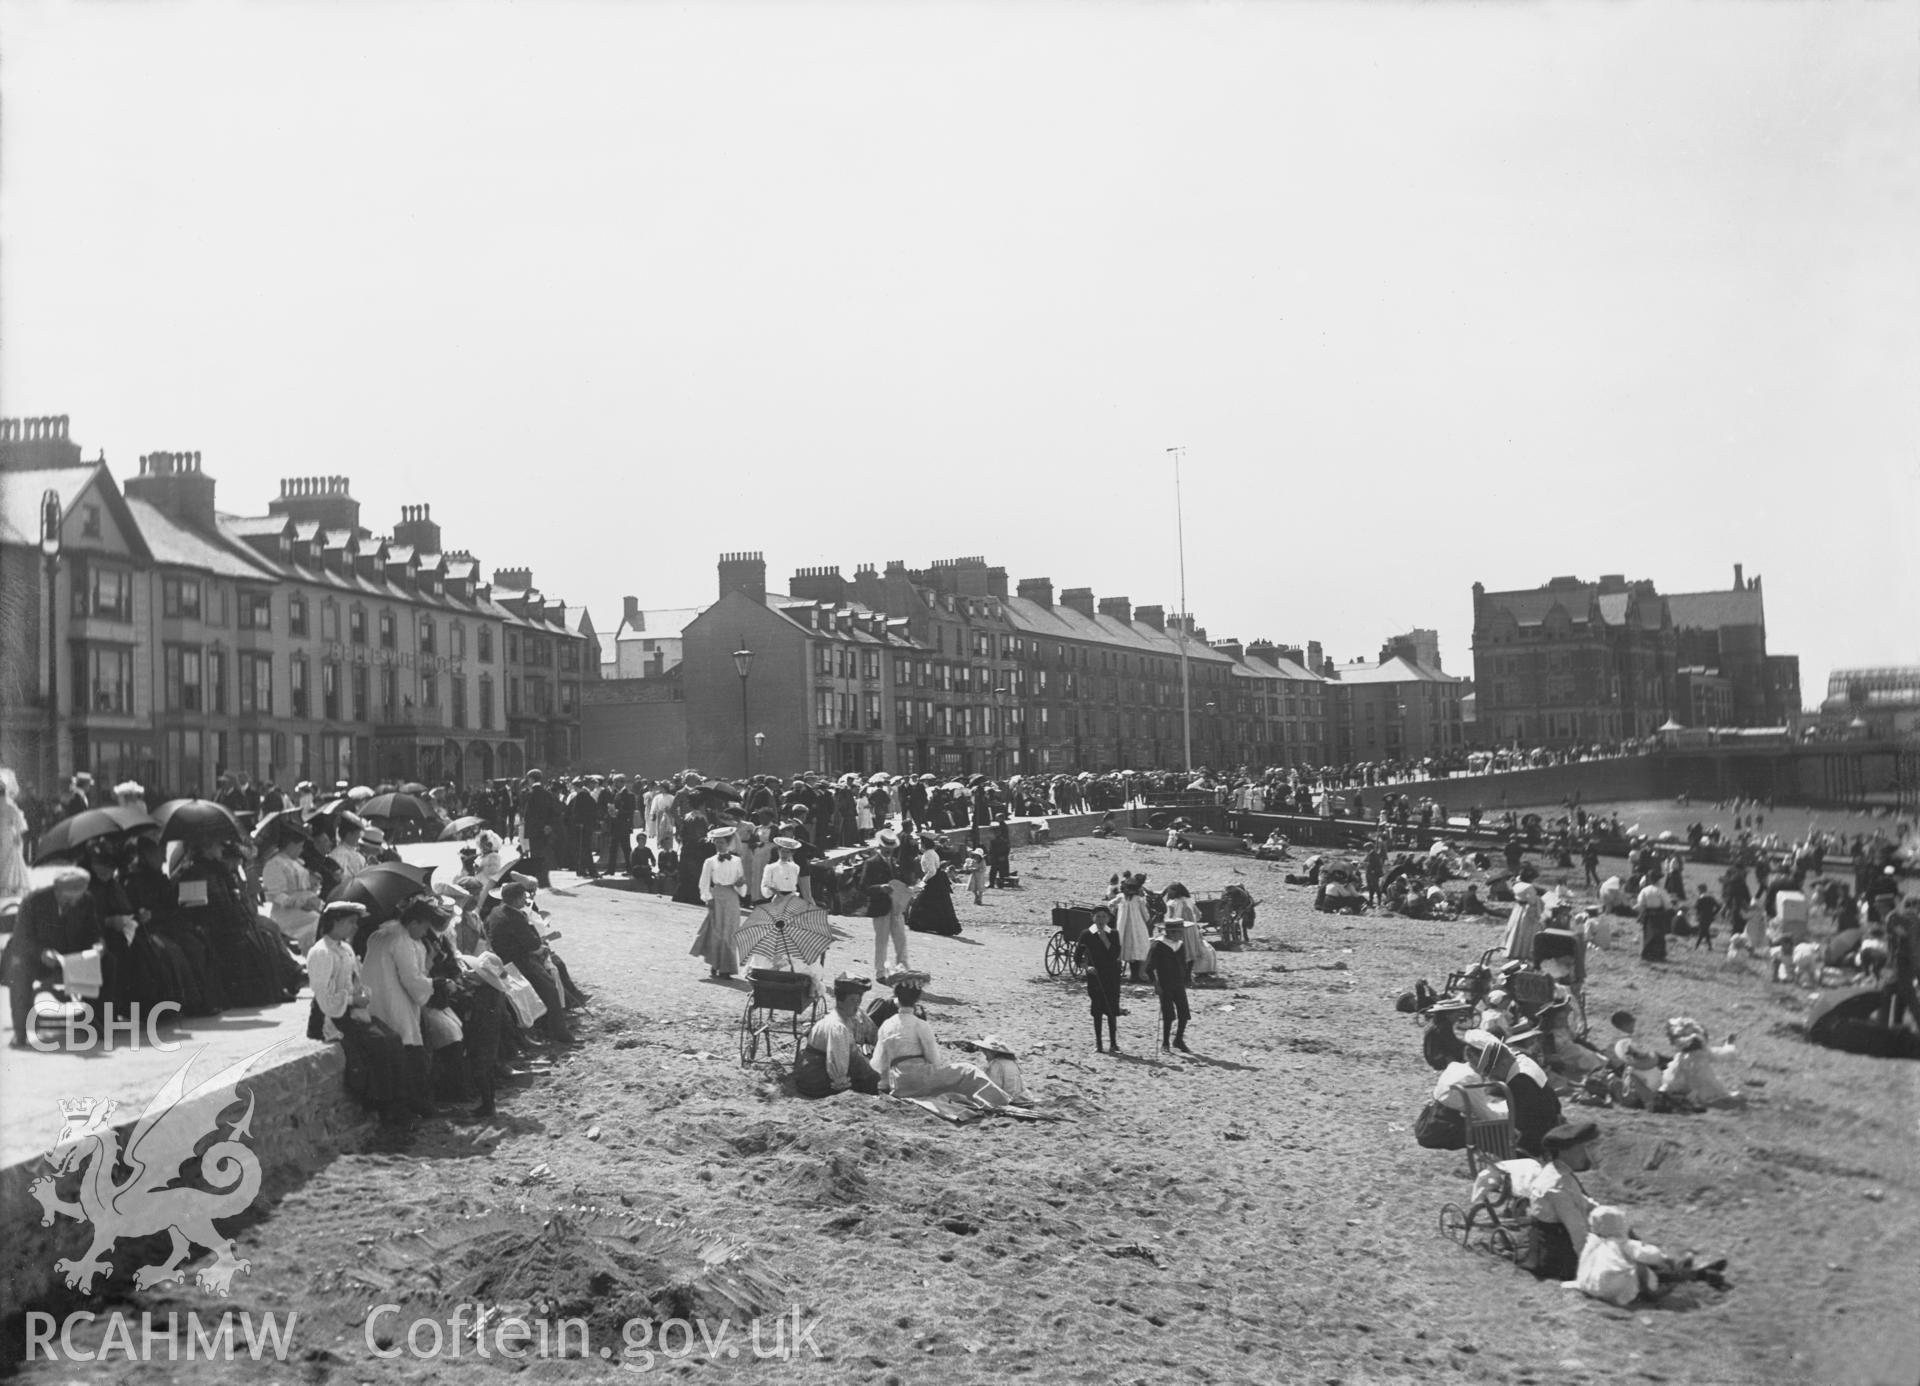 Black and white image dating from c.1910 showing a busy beach scene at Aberystwyth with Marine Terrace in the background.